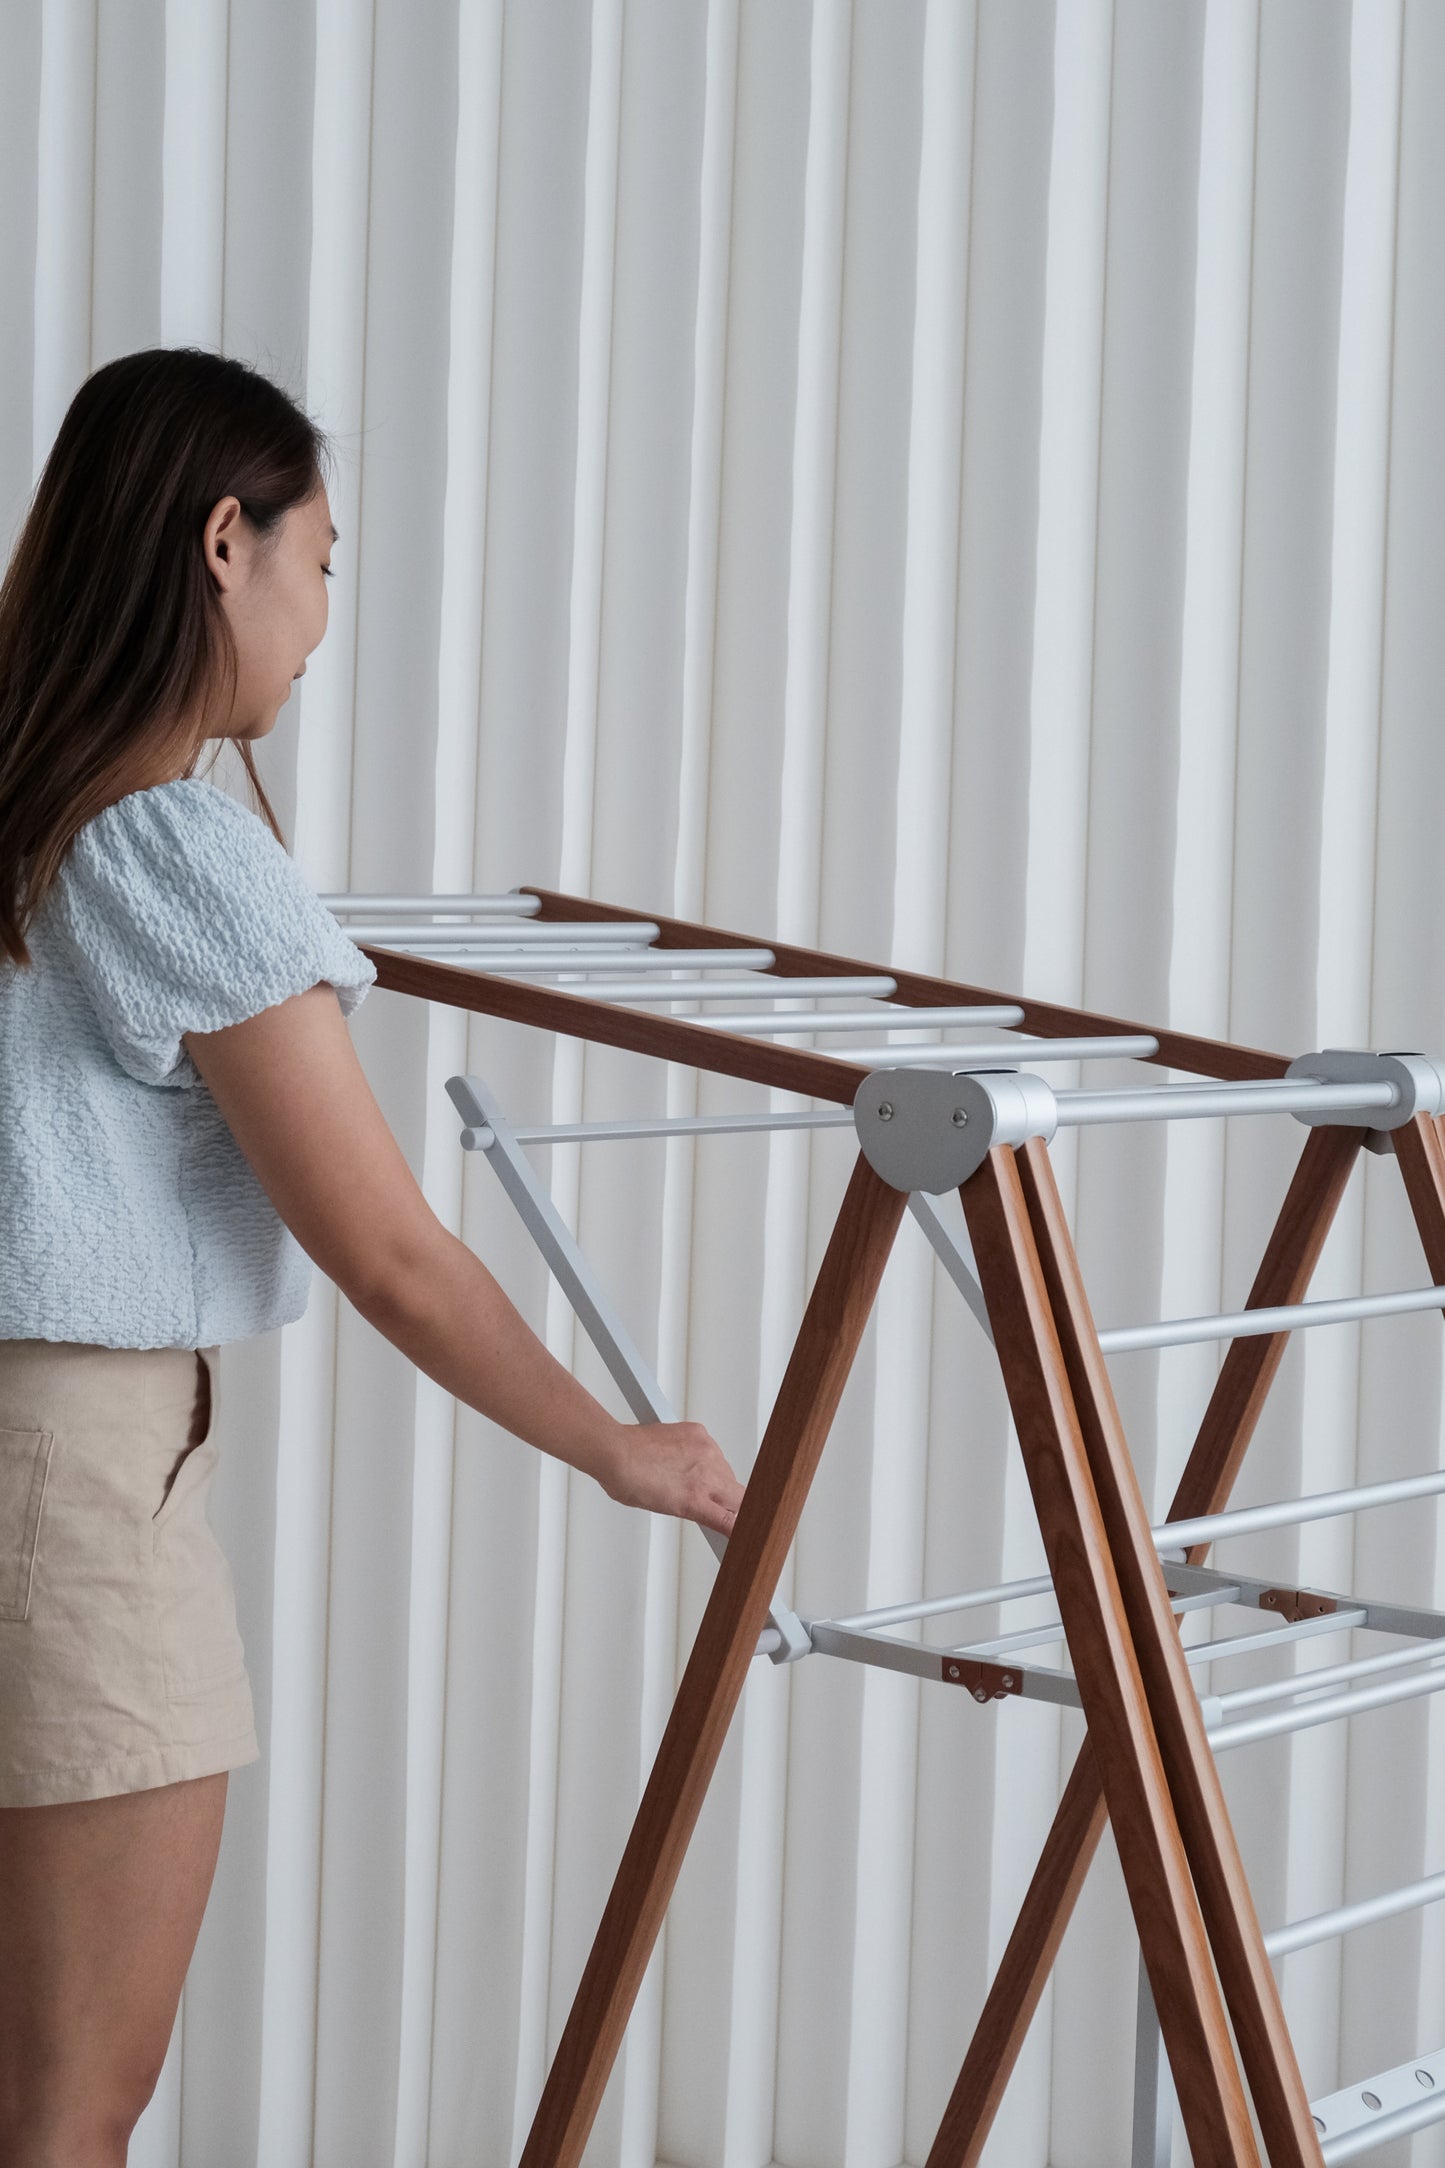 Kanso Portable Drying Rack with Wheels